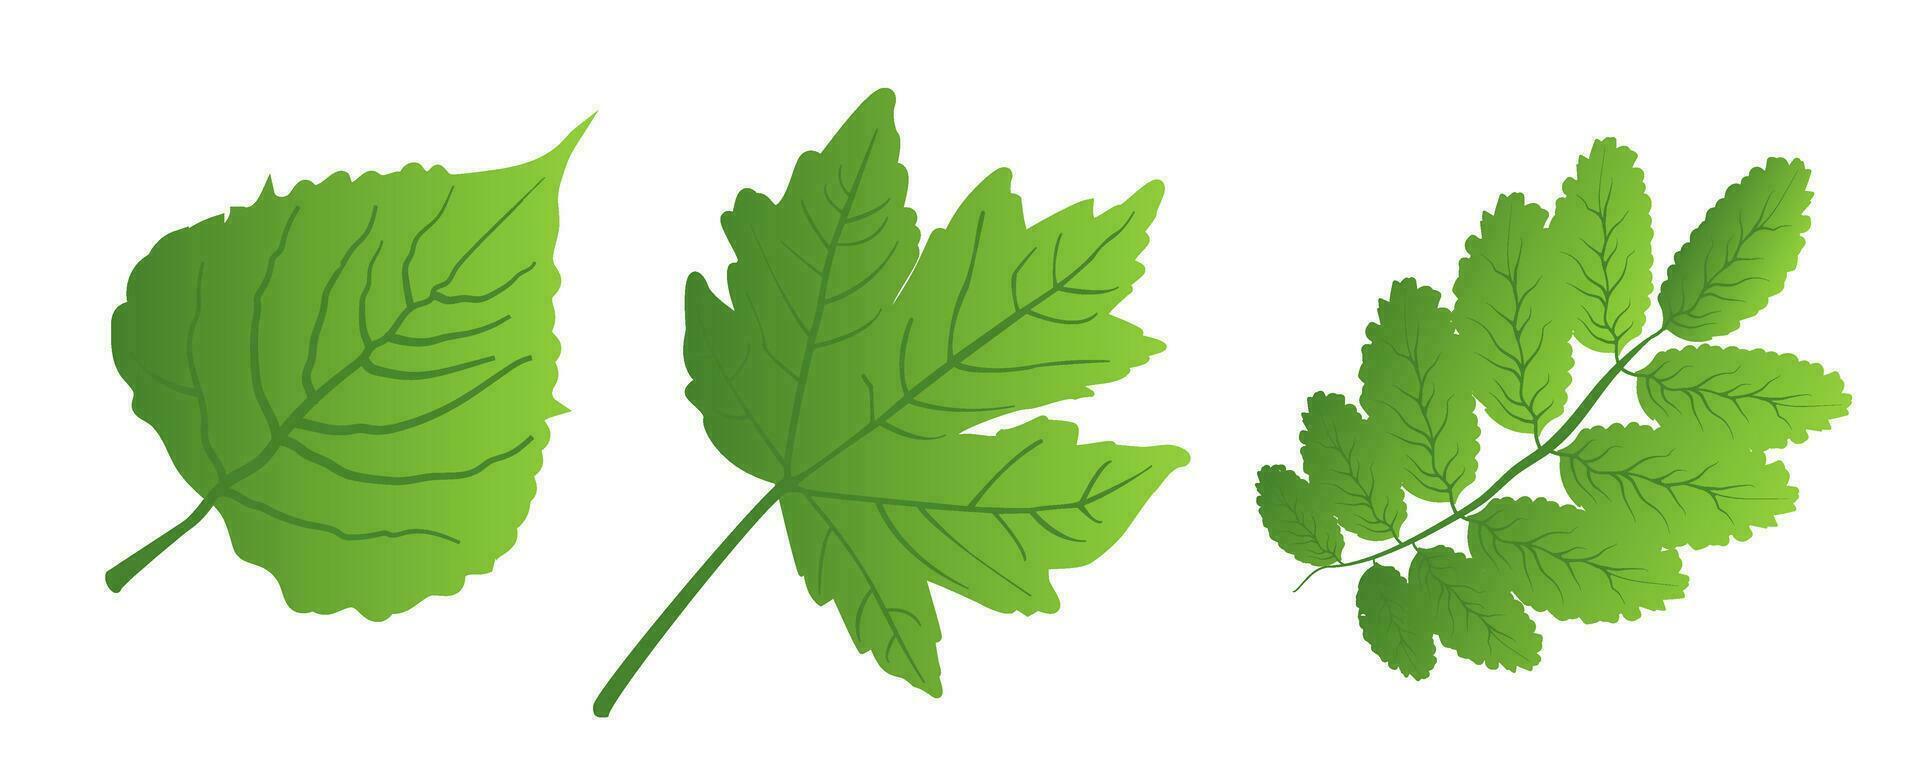 A set of green leaves on a white background, for logos, icons, designs, for the symbolism of the green planet vector